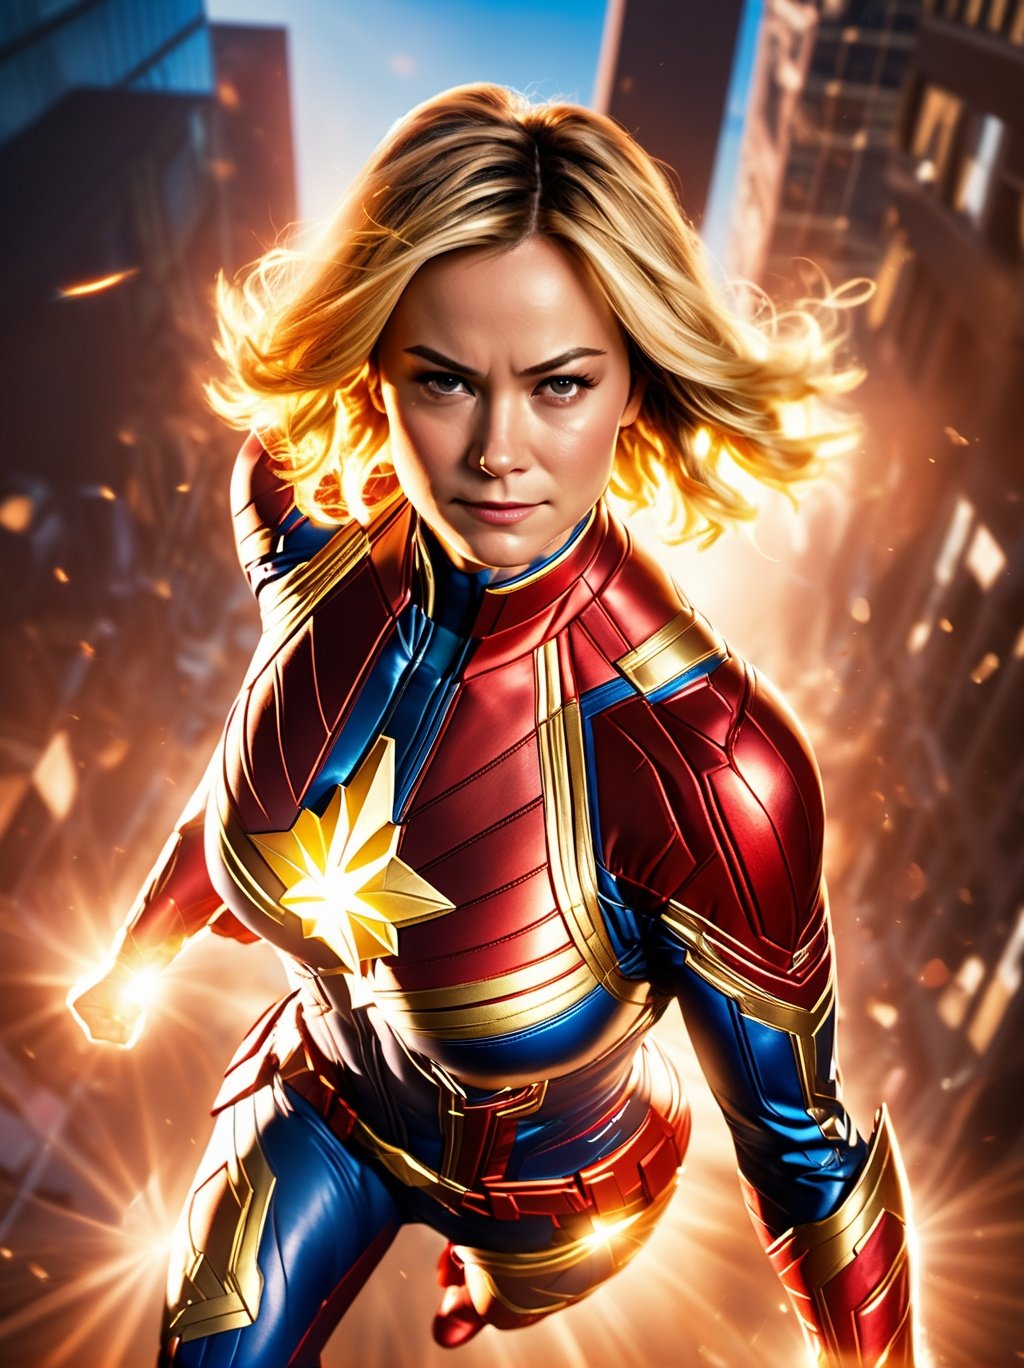 photographic, realistic, realism, cinematic photo, Captain Marvel (Marvel Comics): Captain Marvel's red, blue, and gold suit, glowing emblem, and superhuman powers make her a powerful and inspiring character for cosplayers.,35mm photograph, film, bokeh, award-winning, professional, highly detailed, 4k, highly detailed